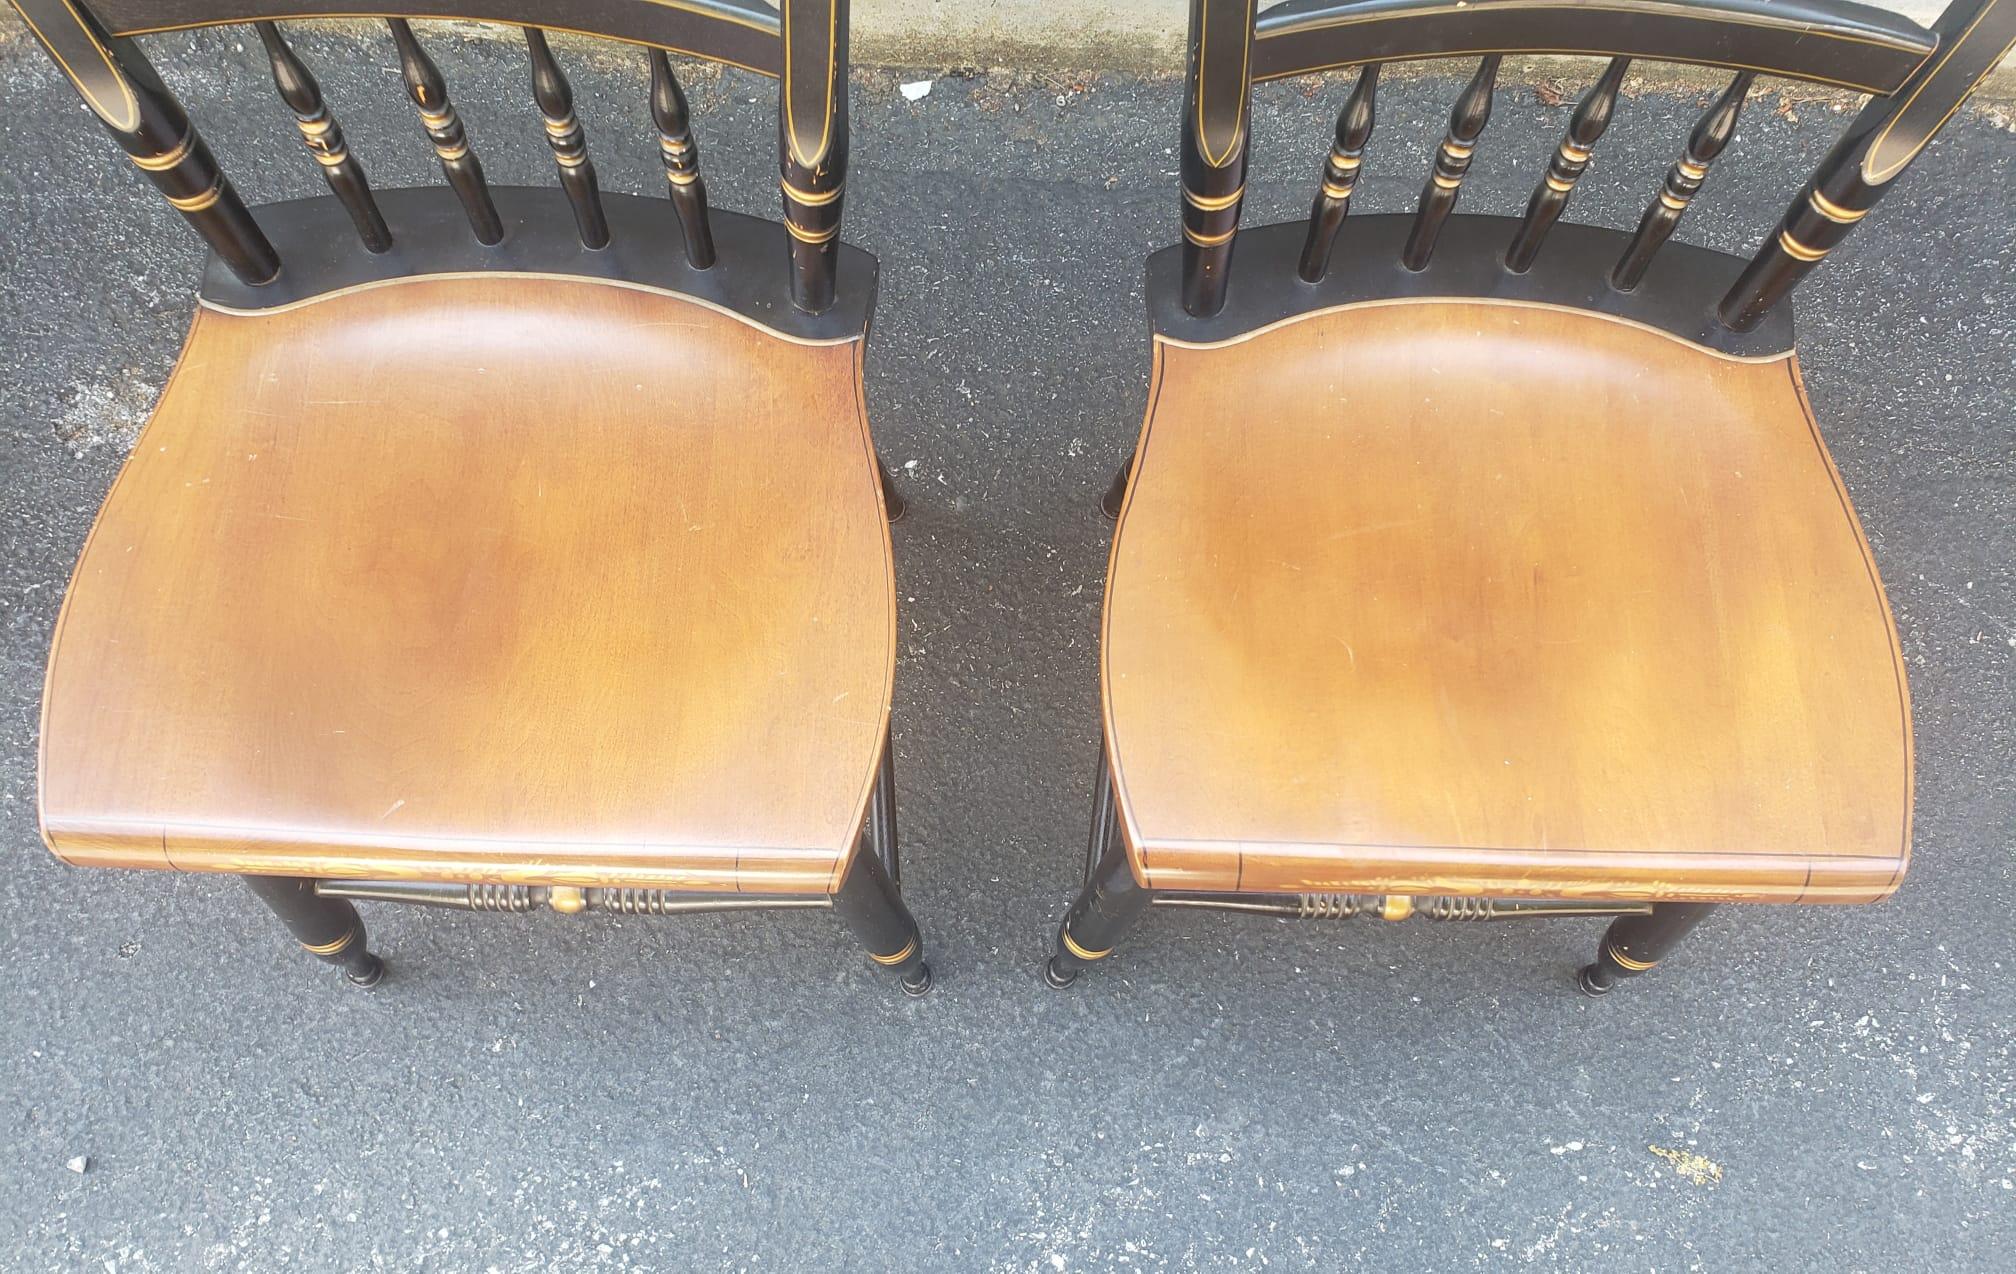 Painted Set of 4 Lambert Hitchcock Ebonized and Gilt Ornate Maple Dining Chairs For Sale